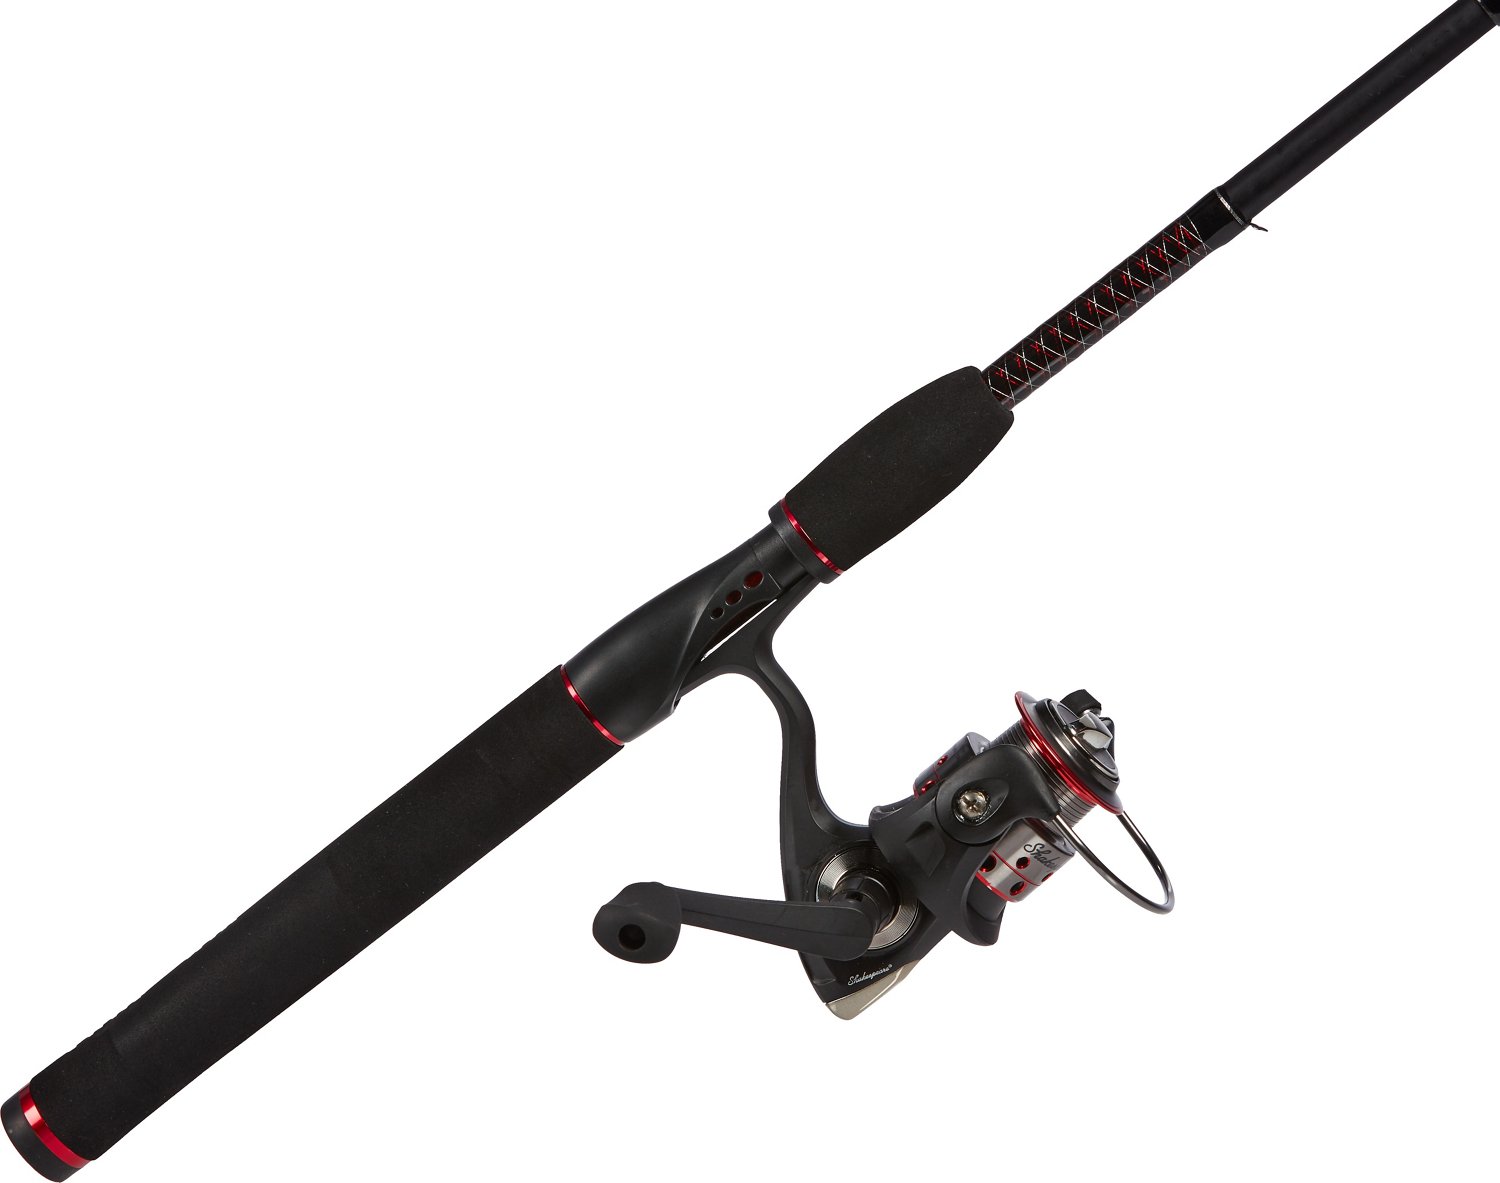 SHAKESPEARE UGLY STIK GX2 TRAVEL SPINNING COMBO – Hartlyn